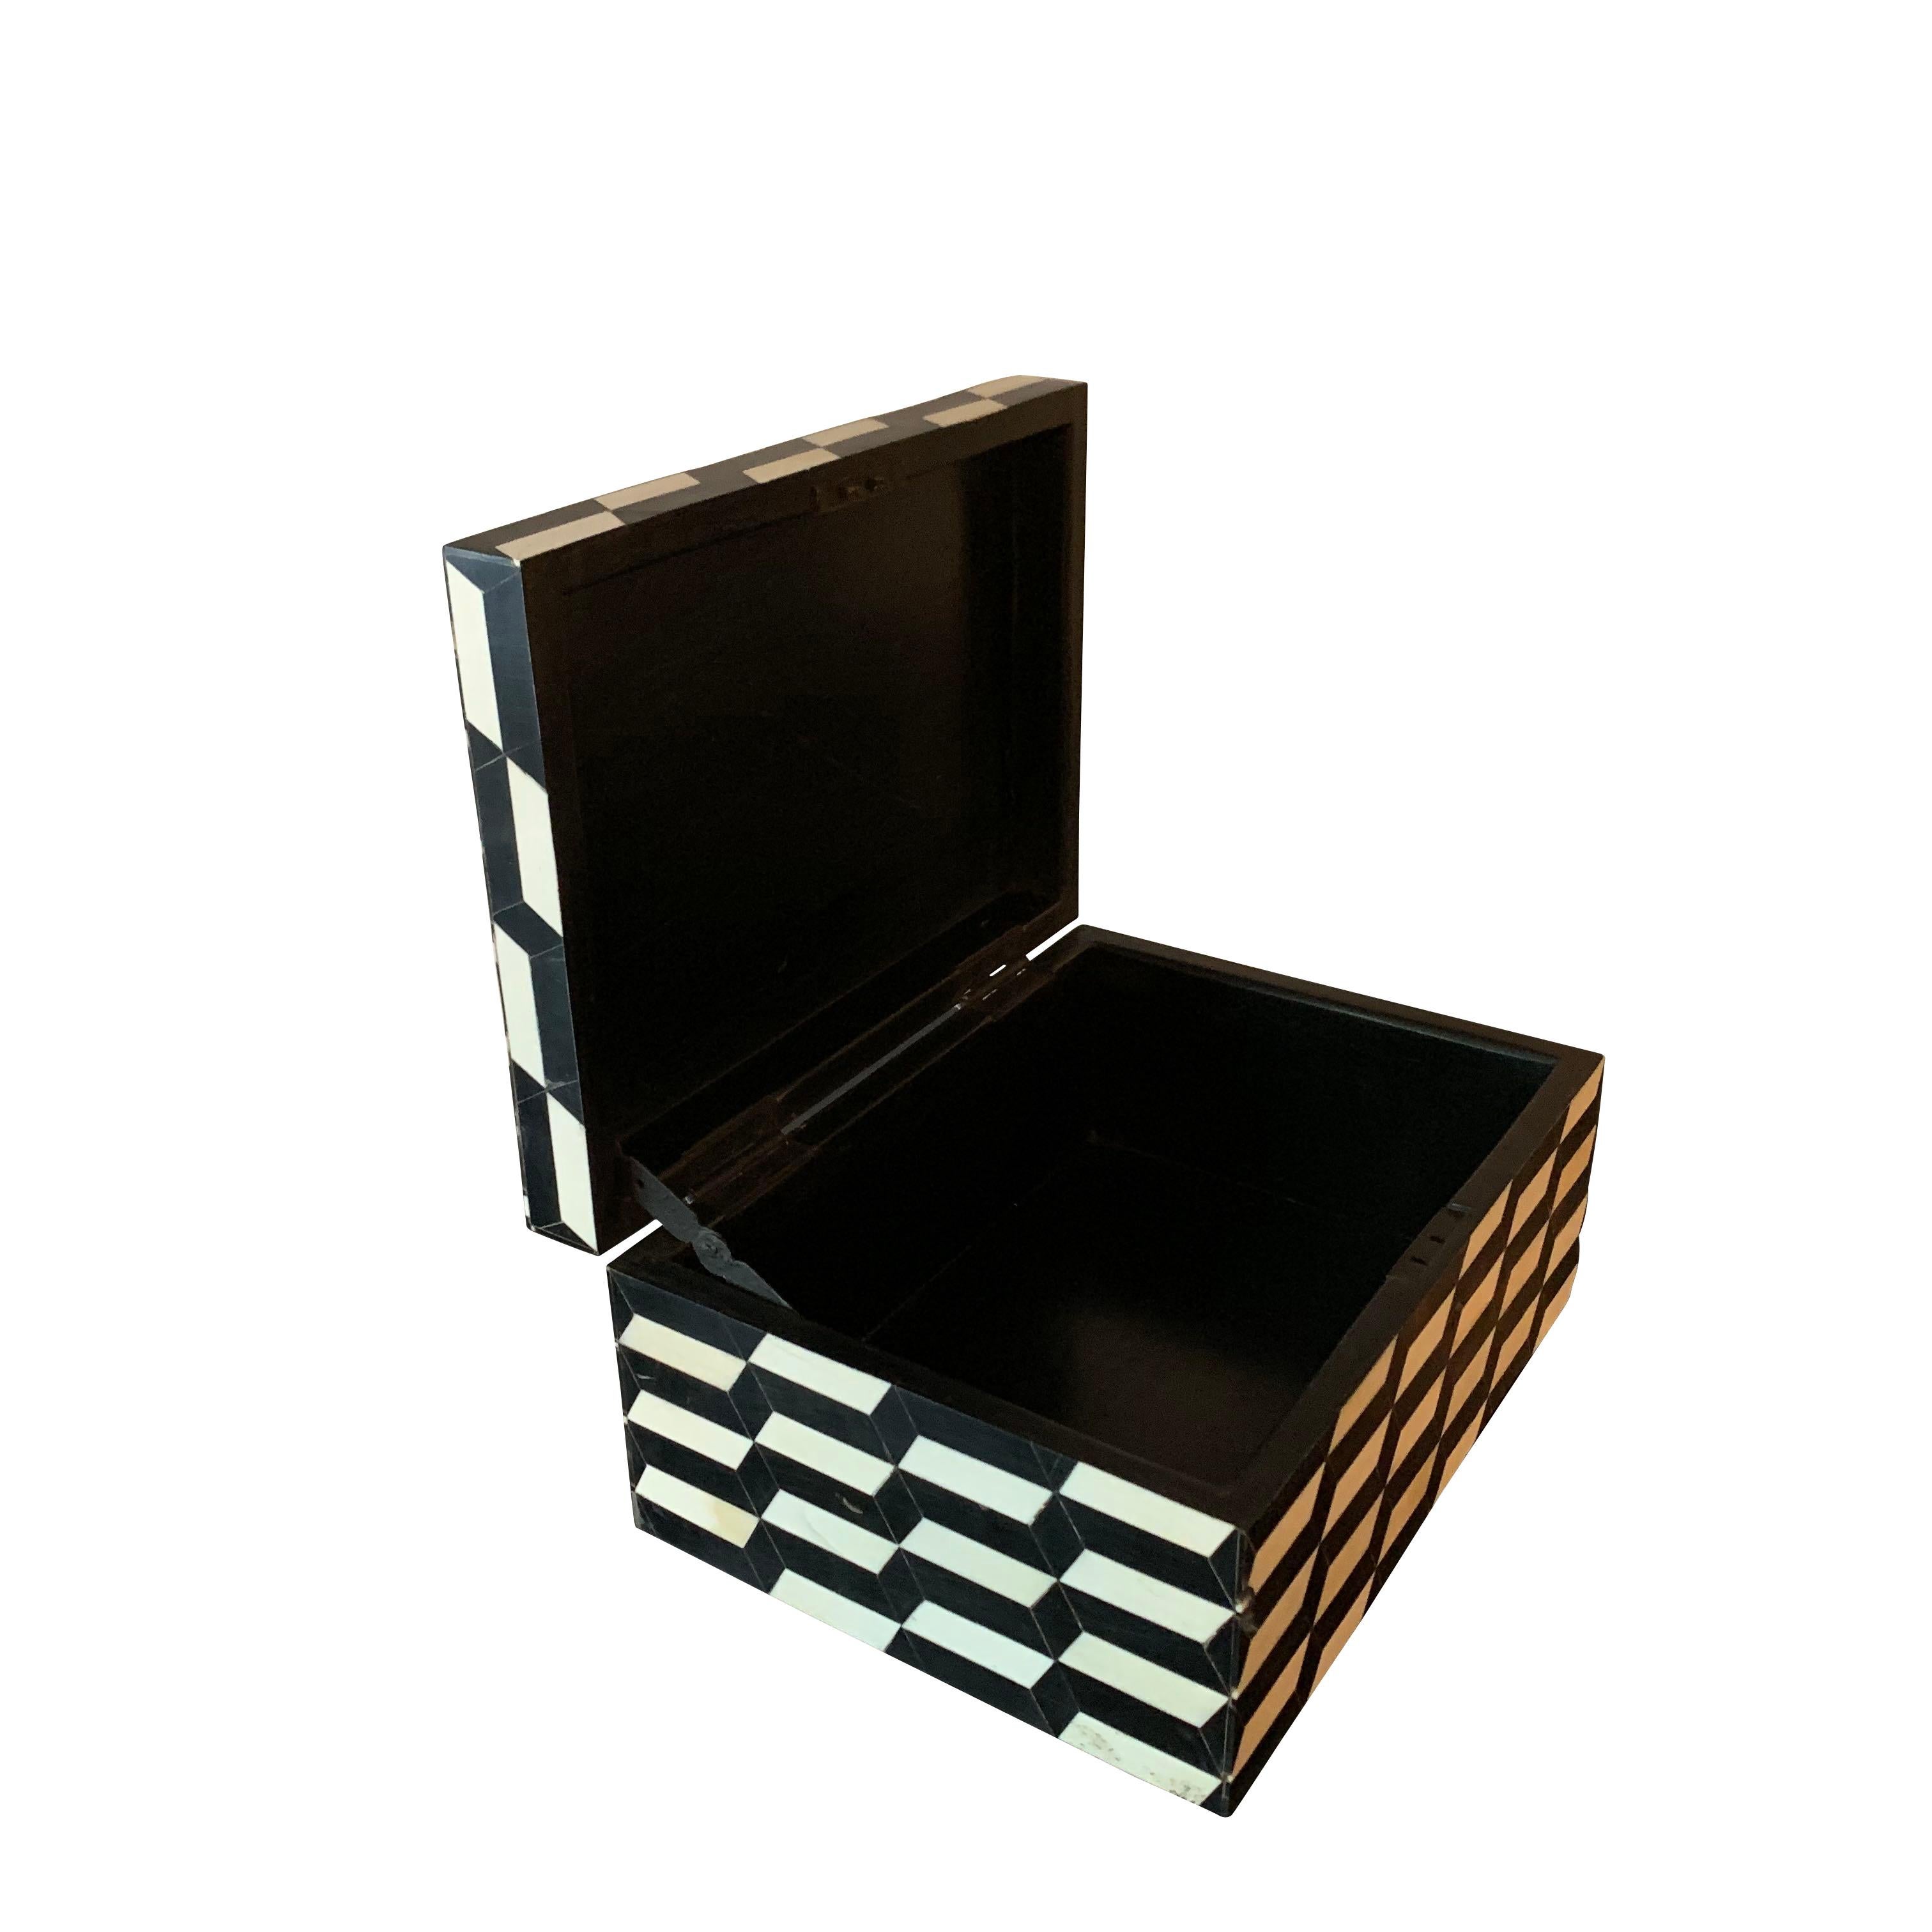 Indonesian black and white bone inlaid in a decorative three dimensional pattern
Flip top open.
  